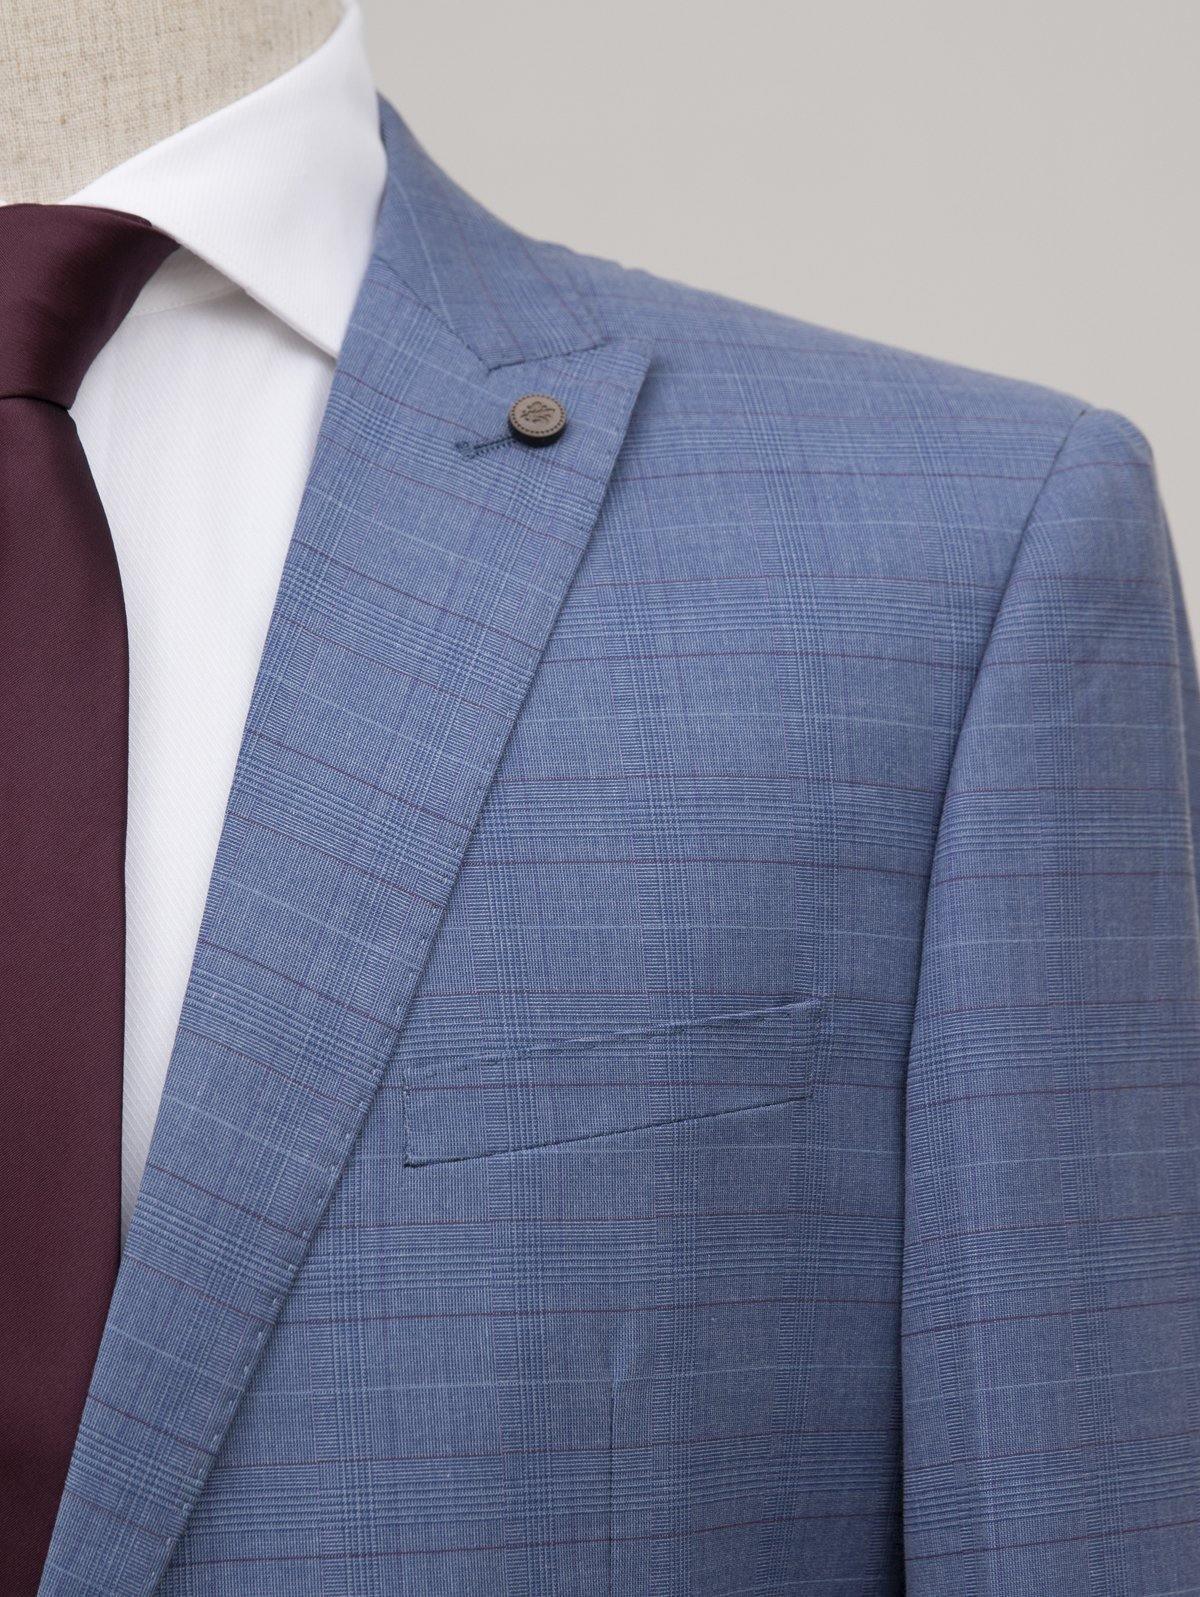 CHECK SUIT 2 BUTTON BLUE at Charcoal Clothing